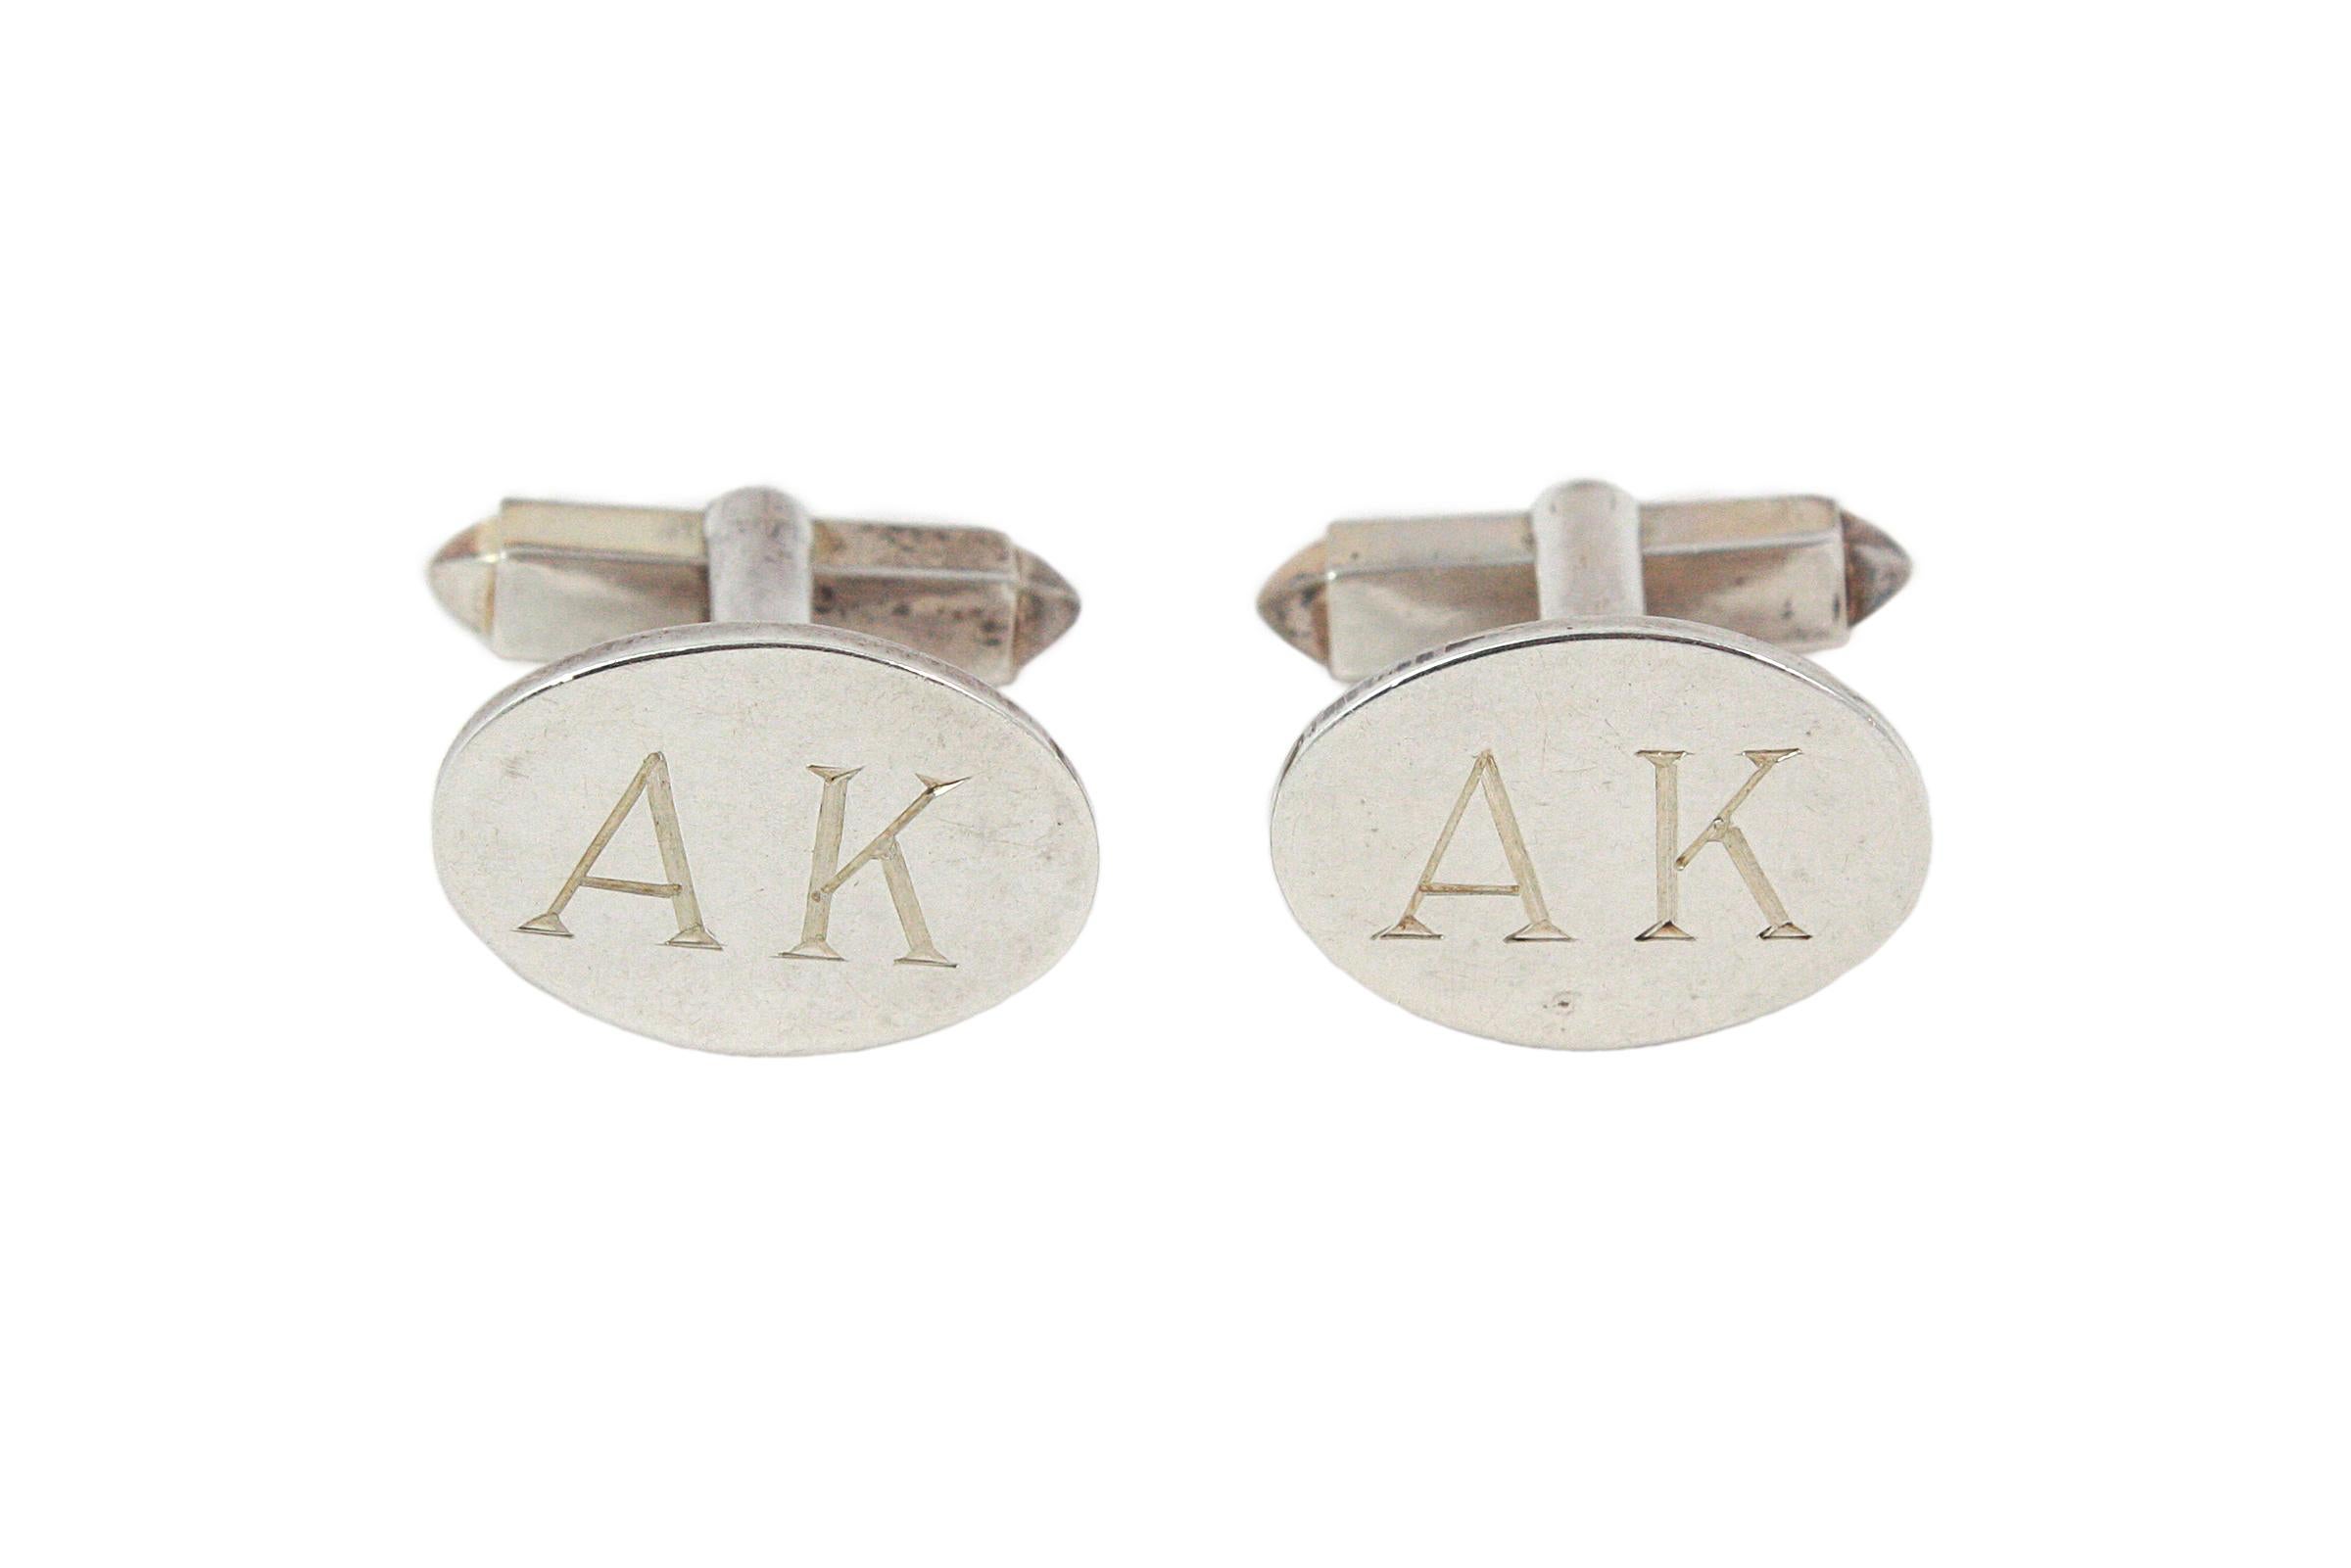 Oval cufflinks
AK monogram 
Made by Bvlgari
Sterling Silver 

BVLGARI box included

It may be interesting to note that they had been custom ordered from BVLGARI by Arnold Kopelson the Academy Award winning producer of PLATOON, as well as numerous